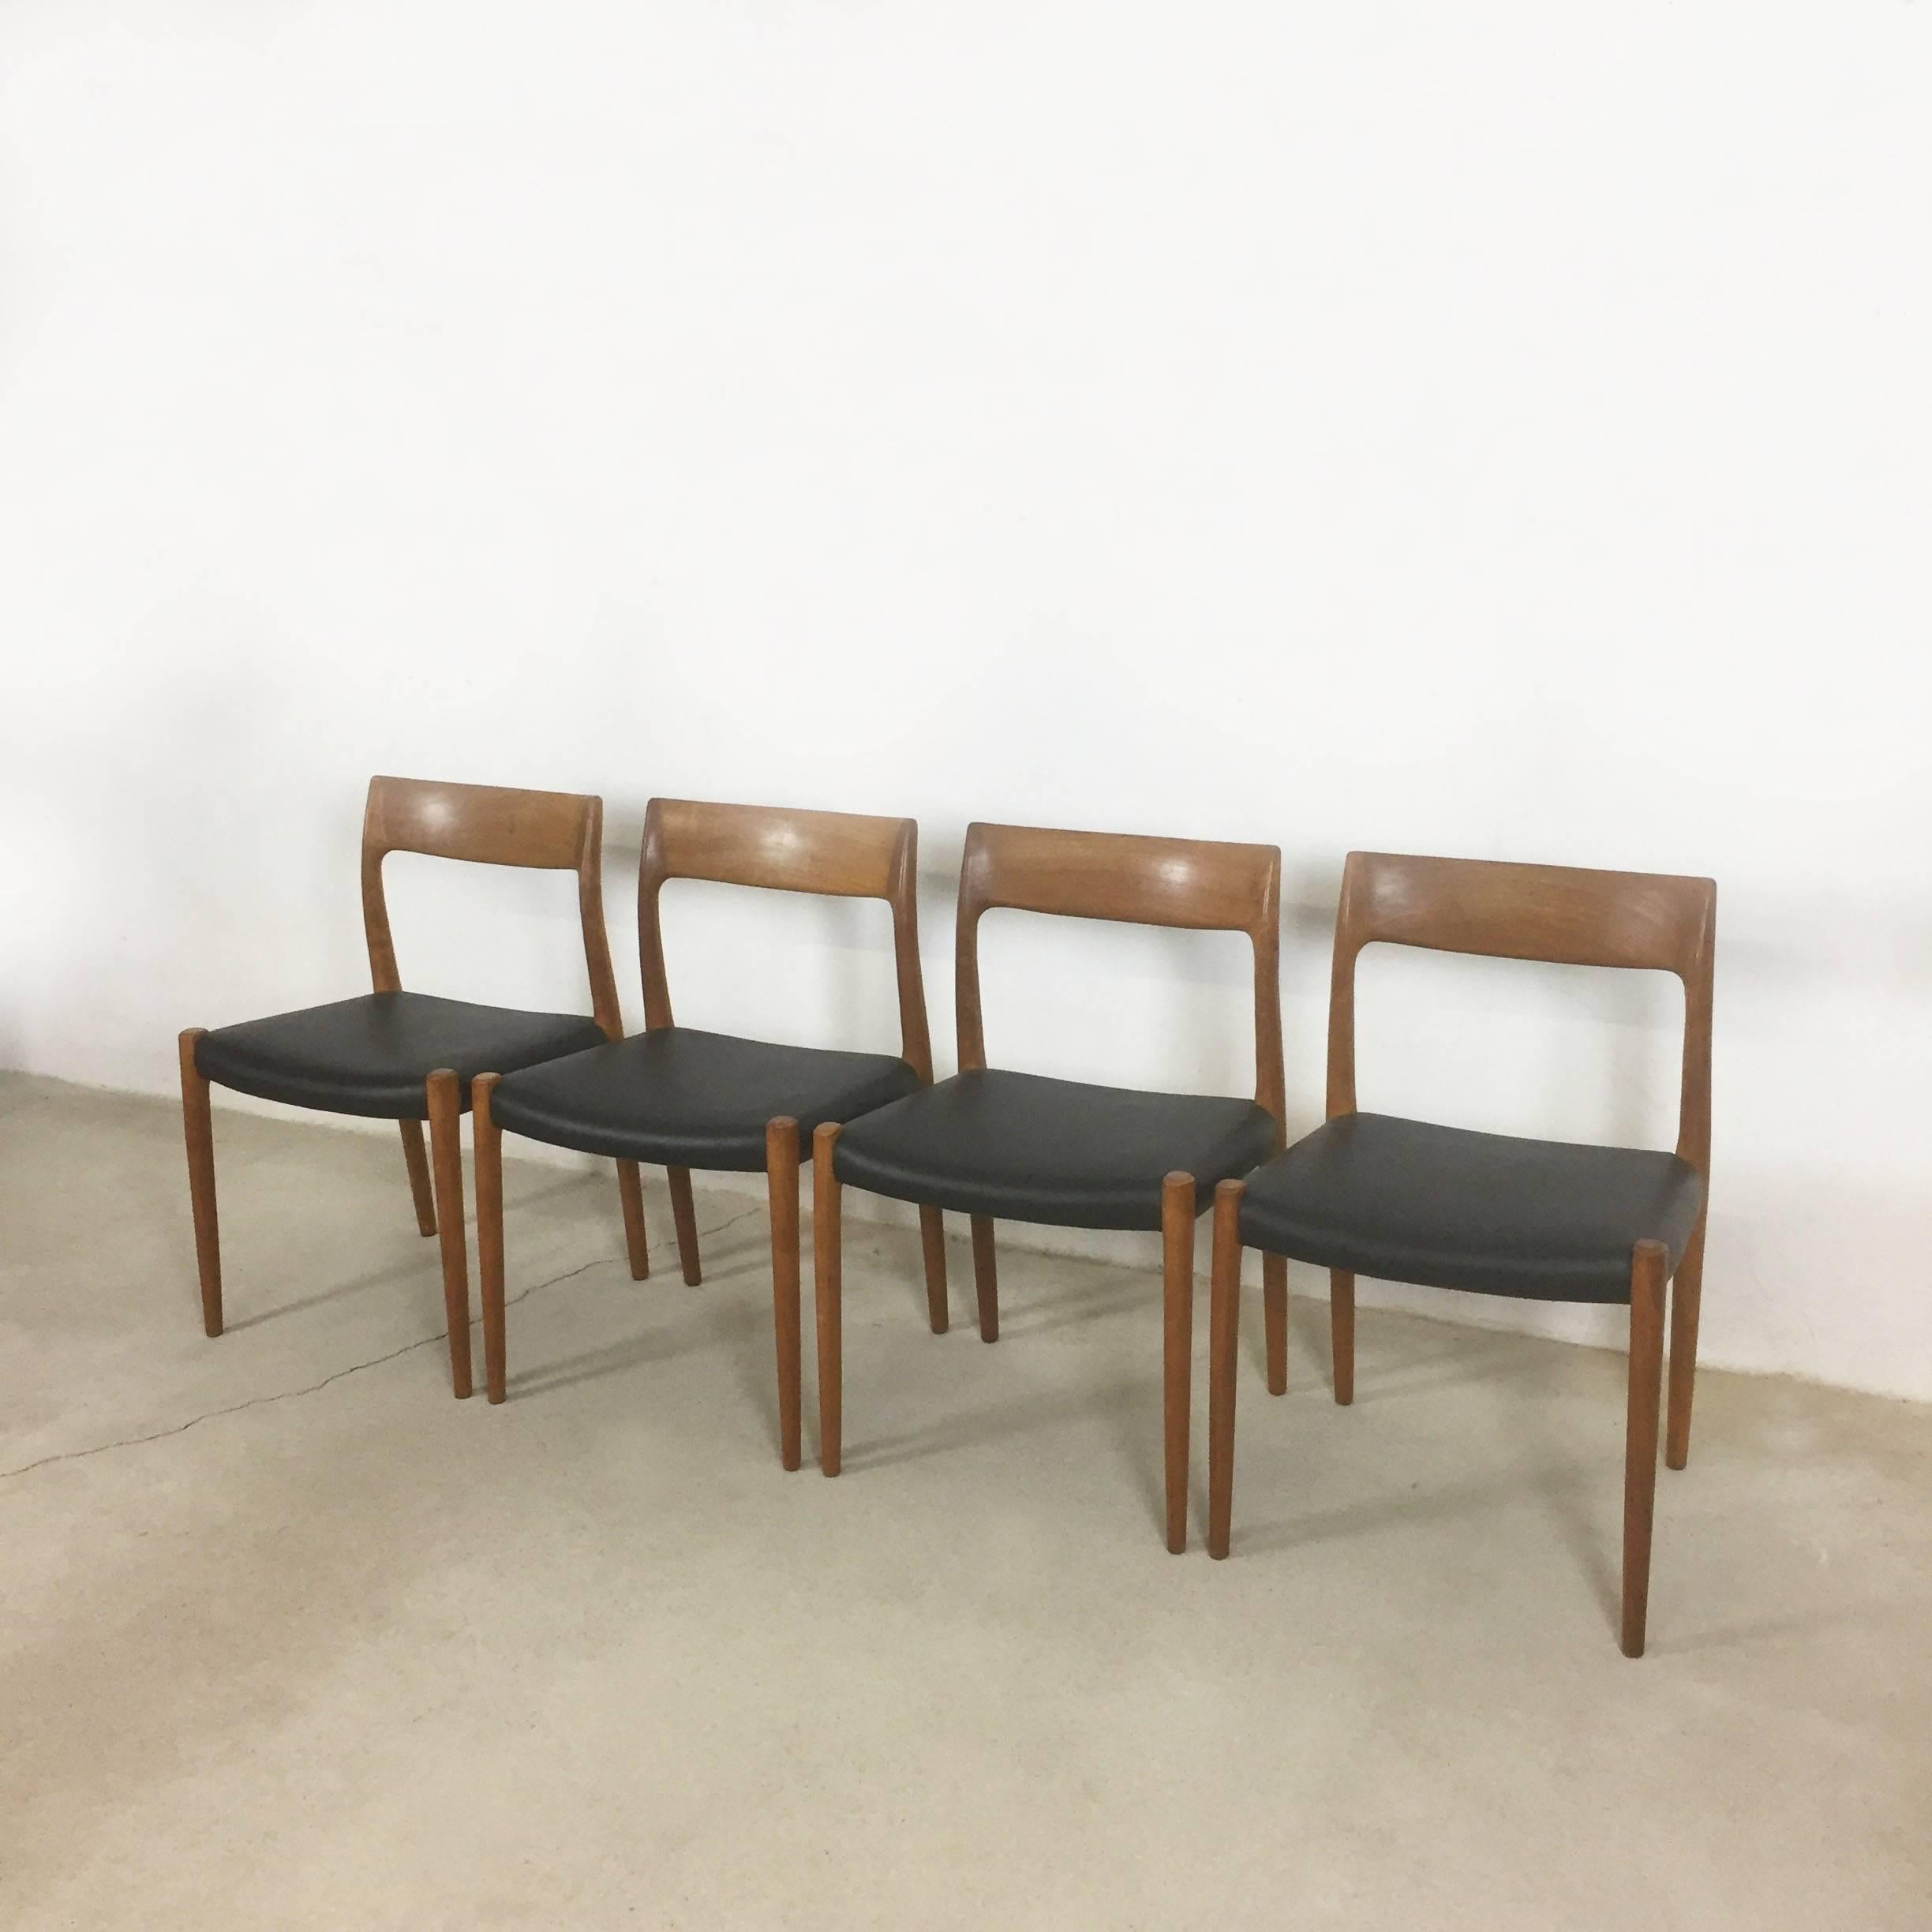 Set of four sophisticated dining chairs, designed by Nils Moller and manufactured in Denmark by Moller Models in the 1960s. The frames are made from solid teak wood and have leatherette seats. The frames are in a nice vintage condition with slight